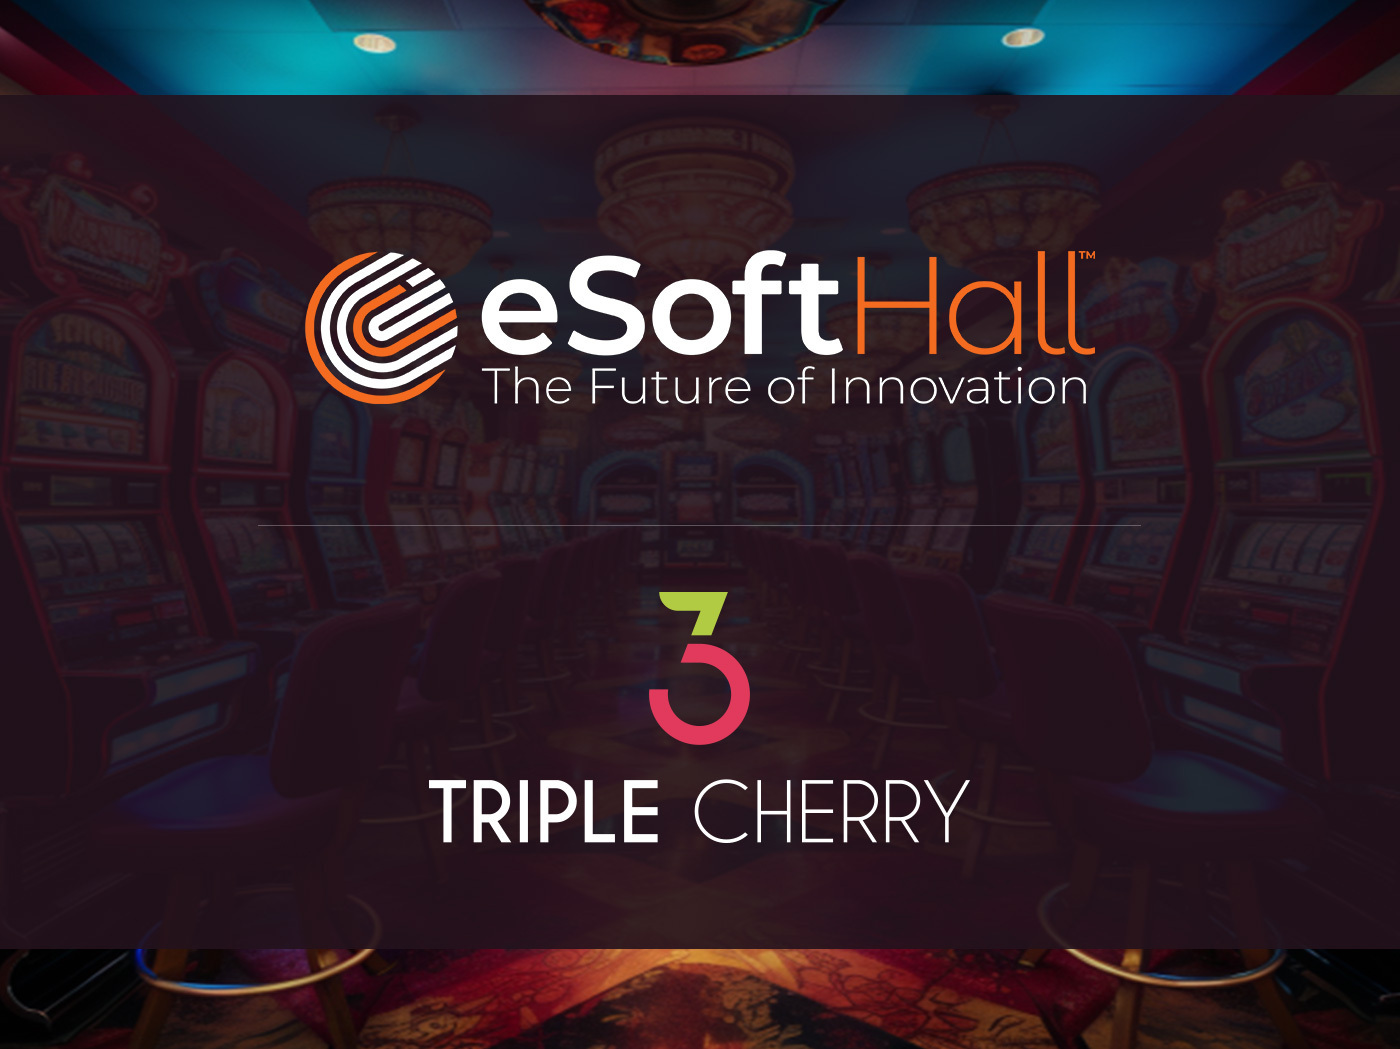 Esofthall and Triple Cherry agreement